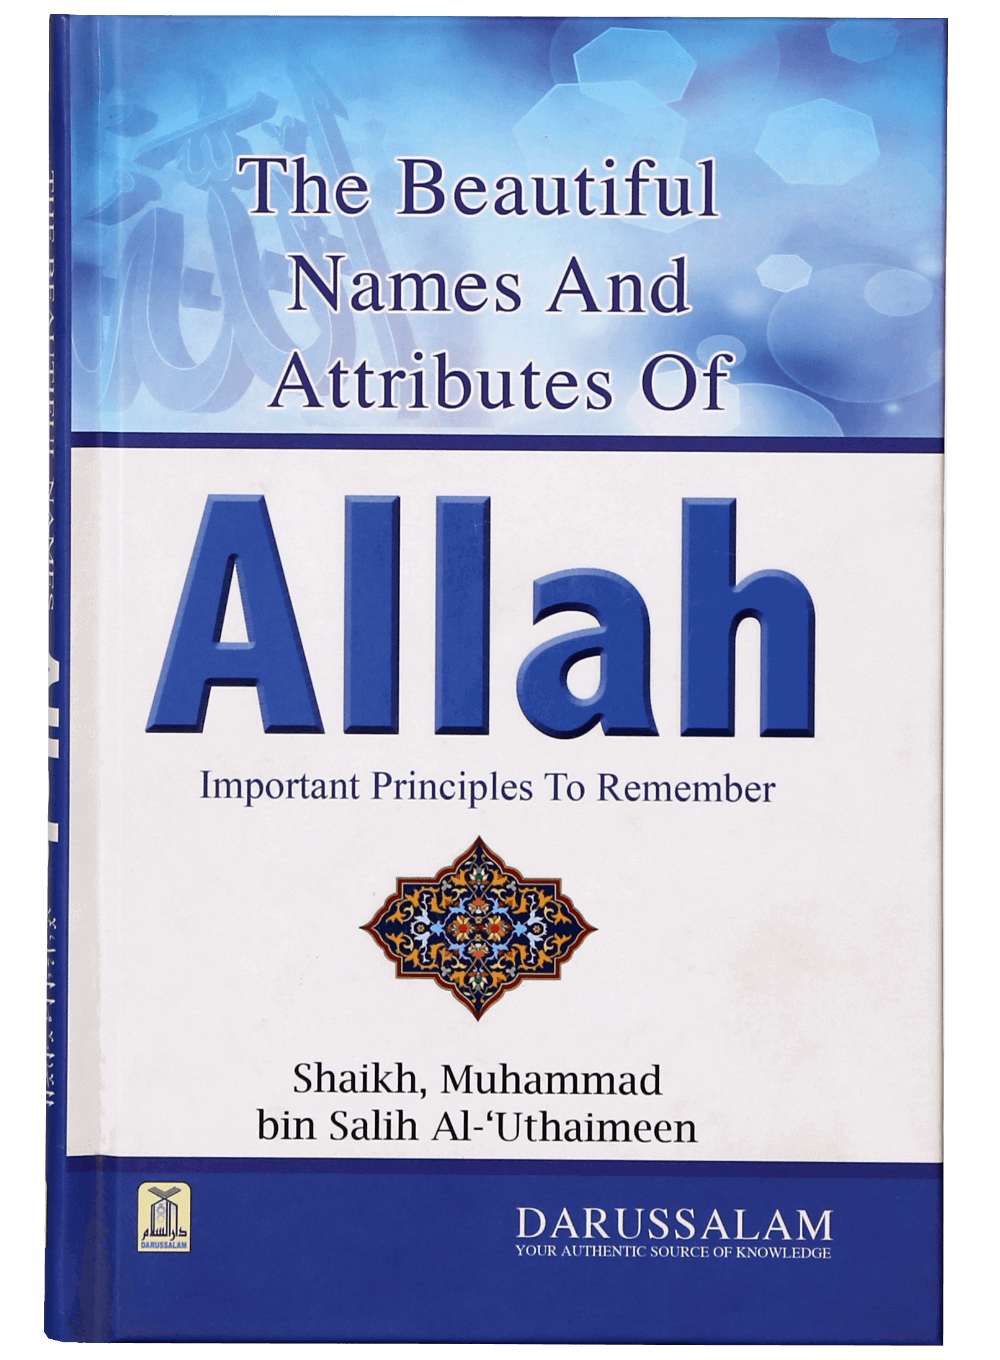 The Beautiful Names & Attributes of Allah: Important Principles to Remember